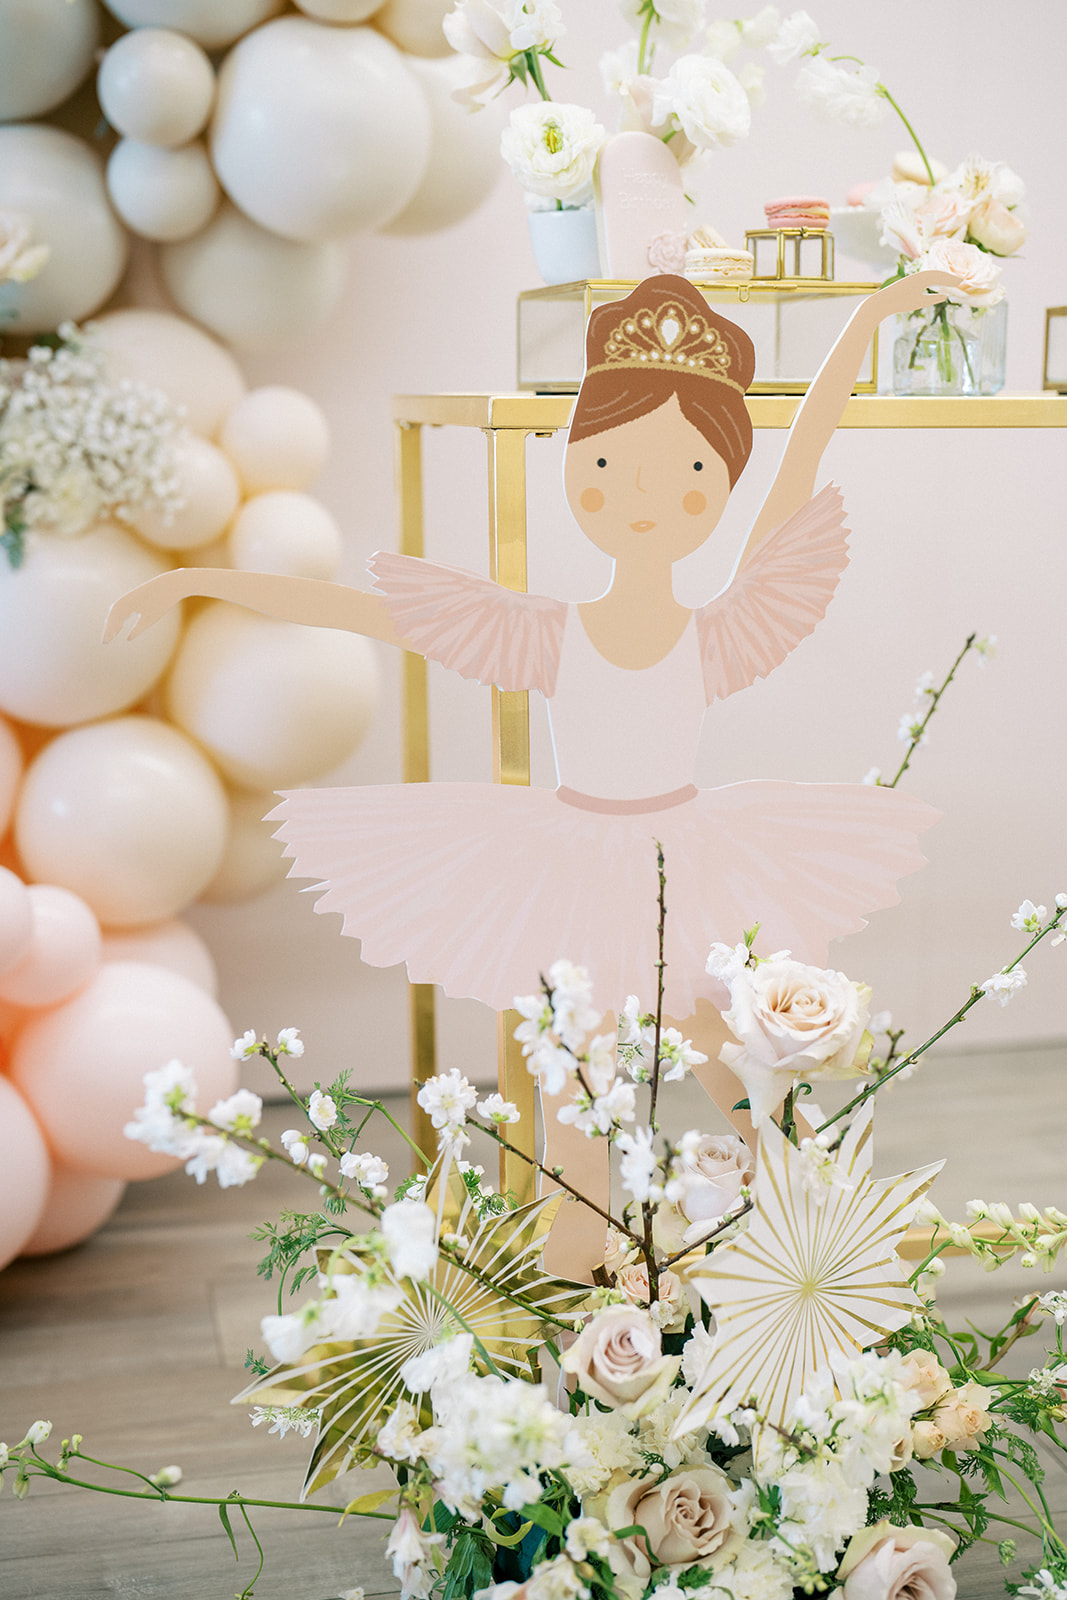 Ballerina character cutout with florals and balloons.